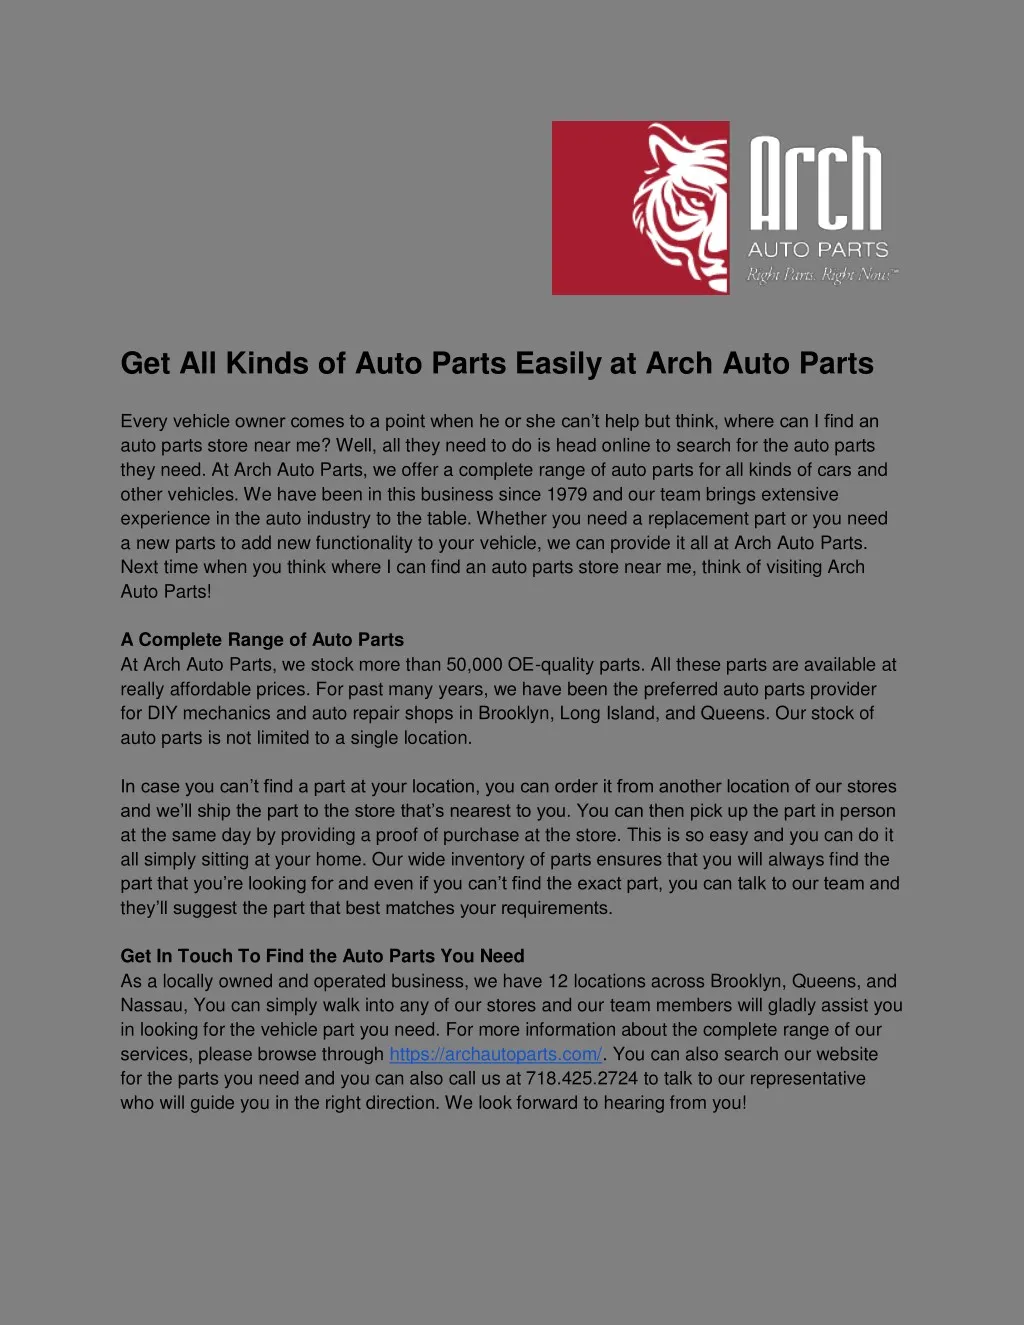 get all kinds of auto parts easily at arch auto